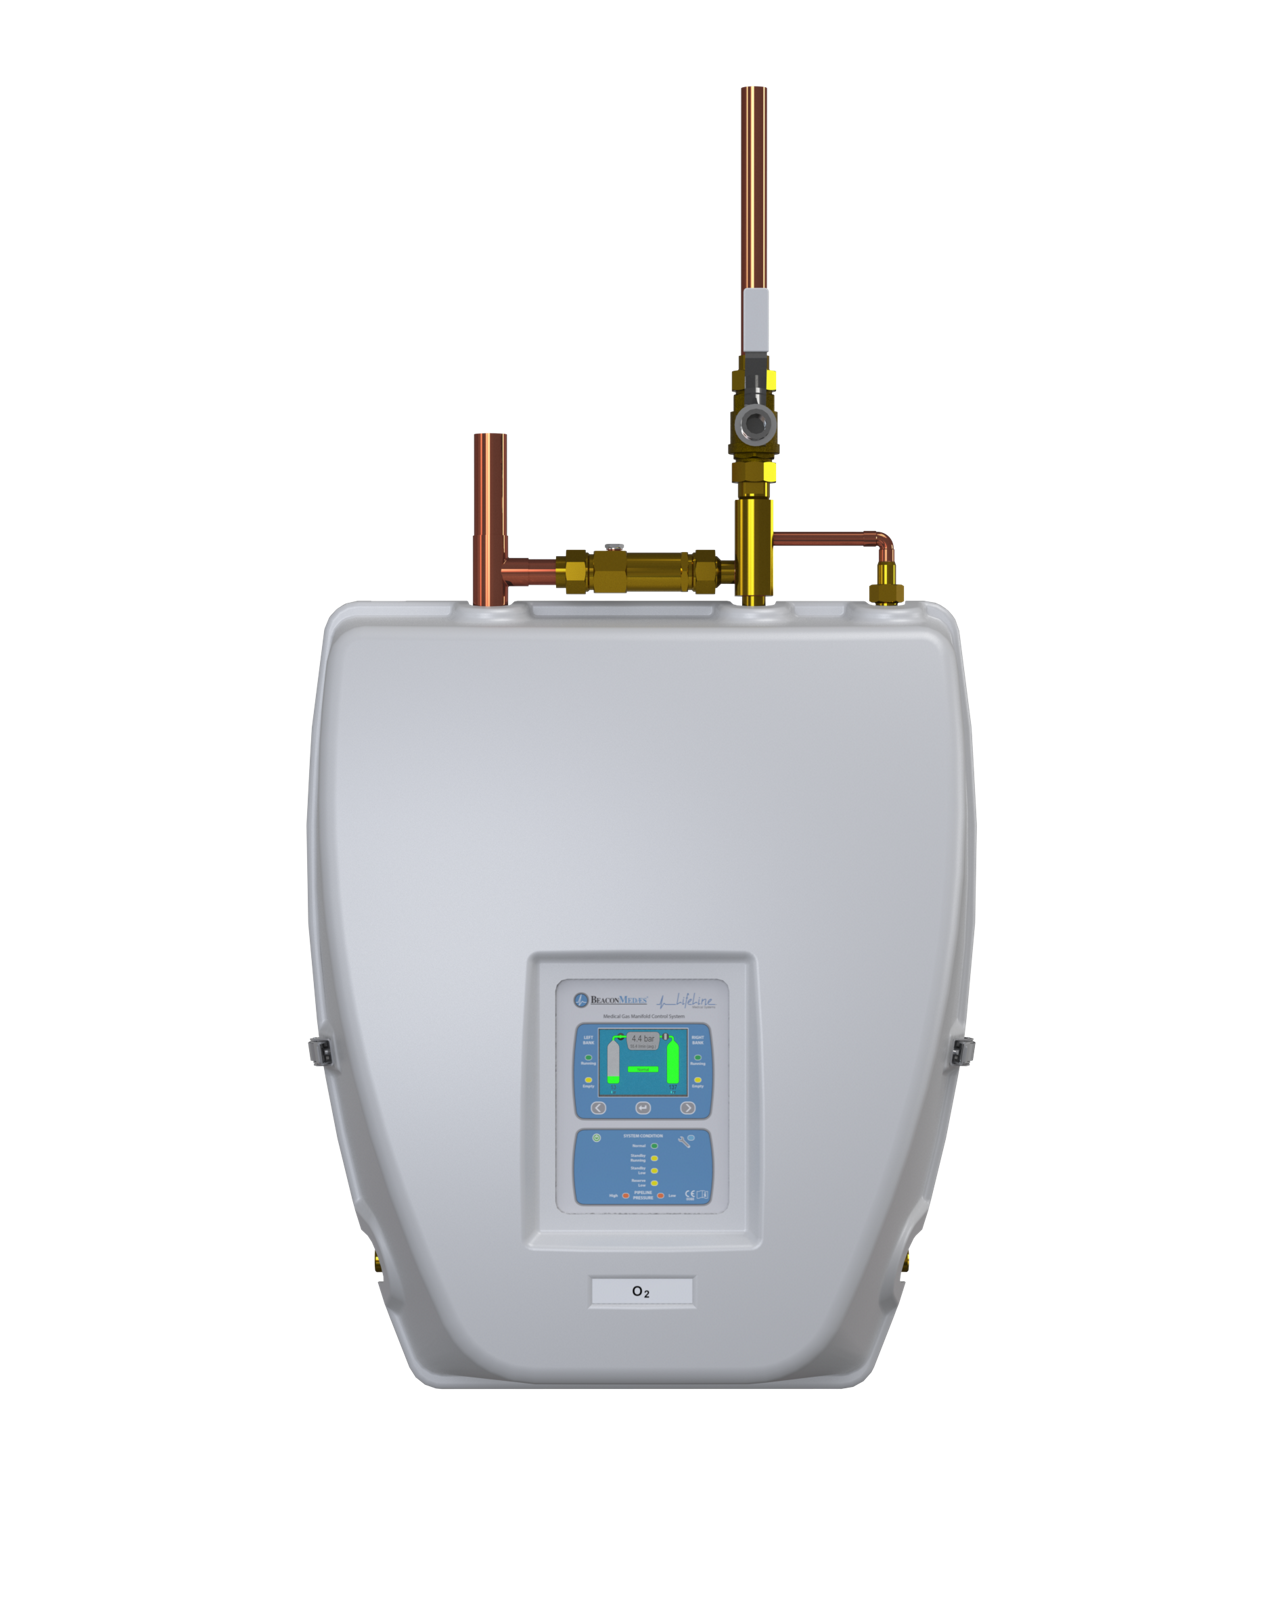 Providers of Reliable Medical Gas Supply Systems UK